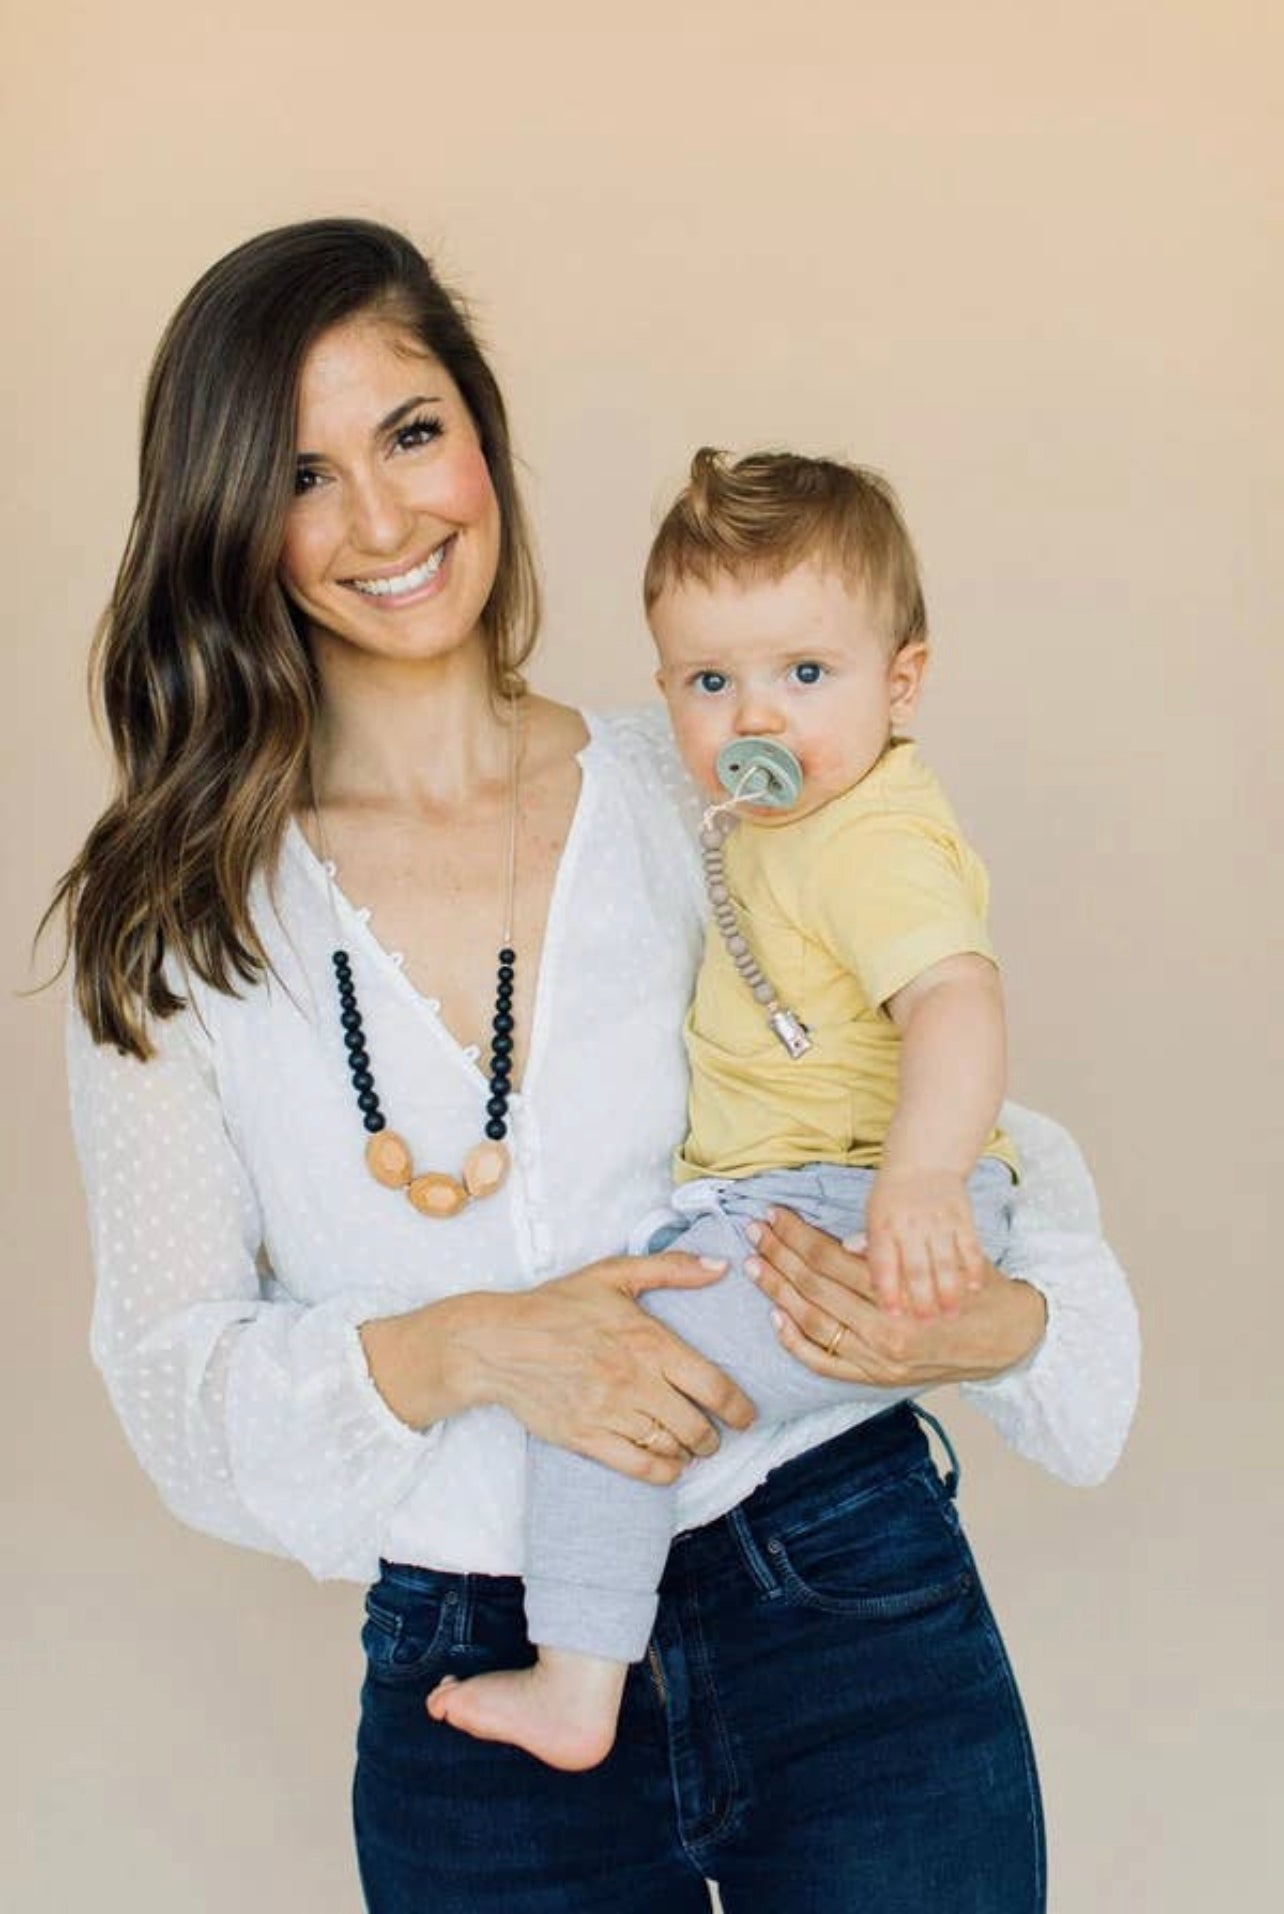 The Austin teething necklace